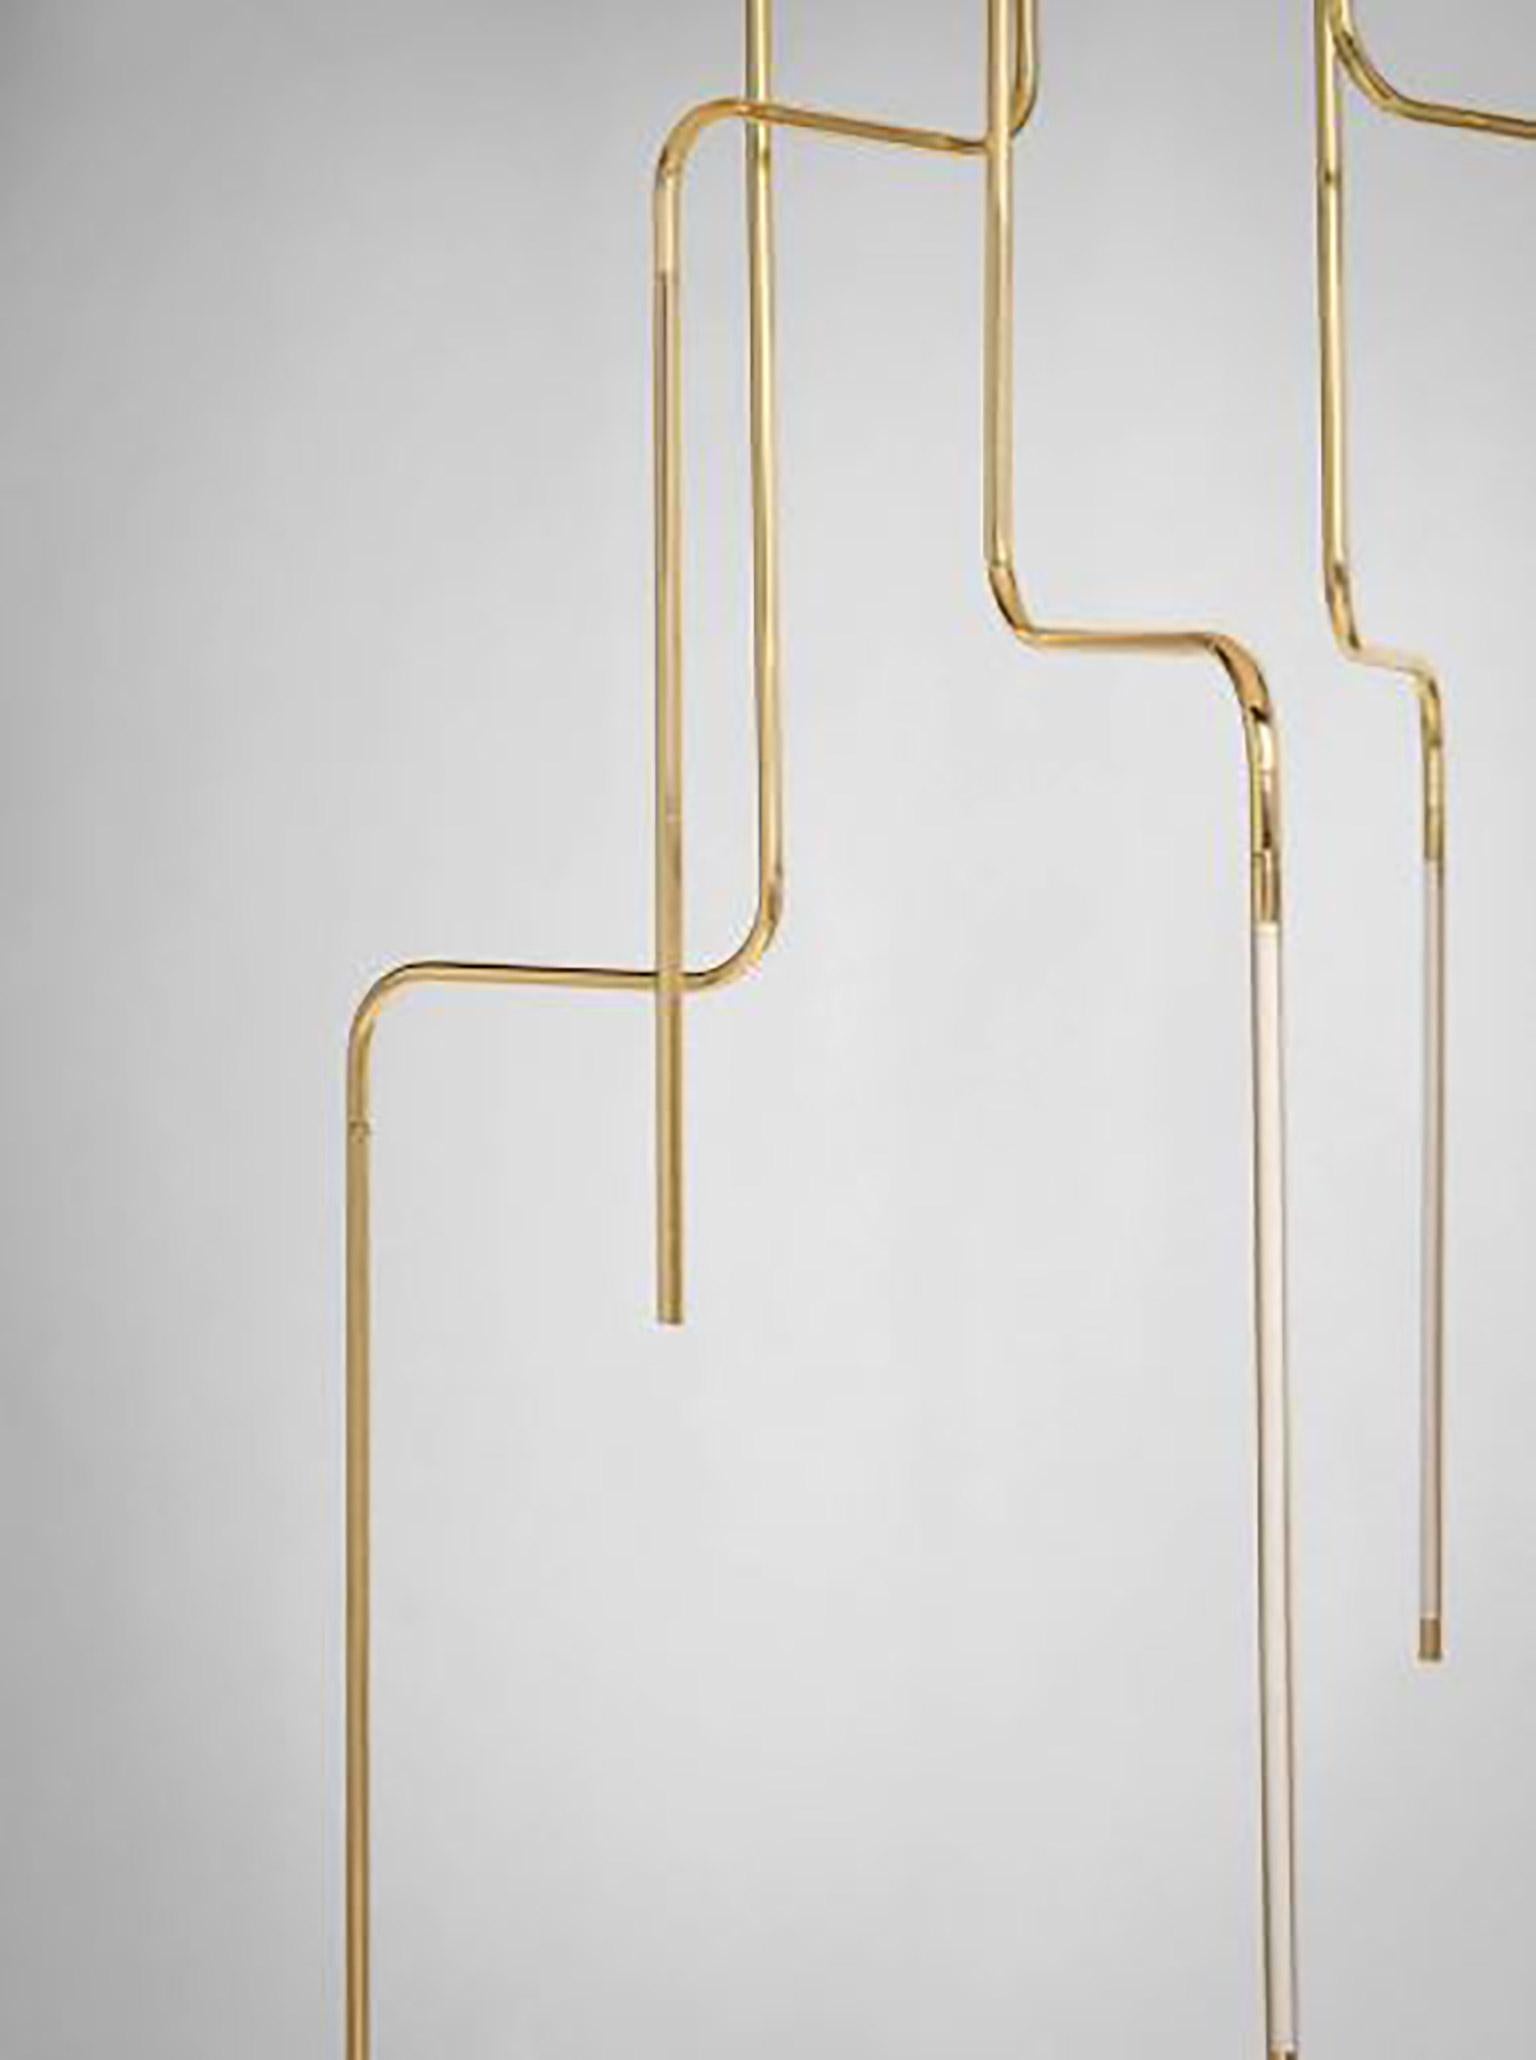 SEM Gold collection, six arms composition ceiling lamp in polished or fine brushed tubular brass with the double joint. Different sizes and compositions: H 110/155/175 cm. Horizontal arm length measurement of 20 cm. Lamp type LED 6W - 3000°K Voltage